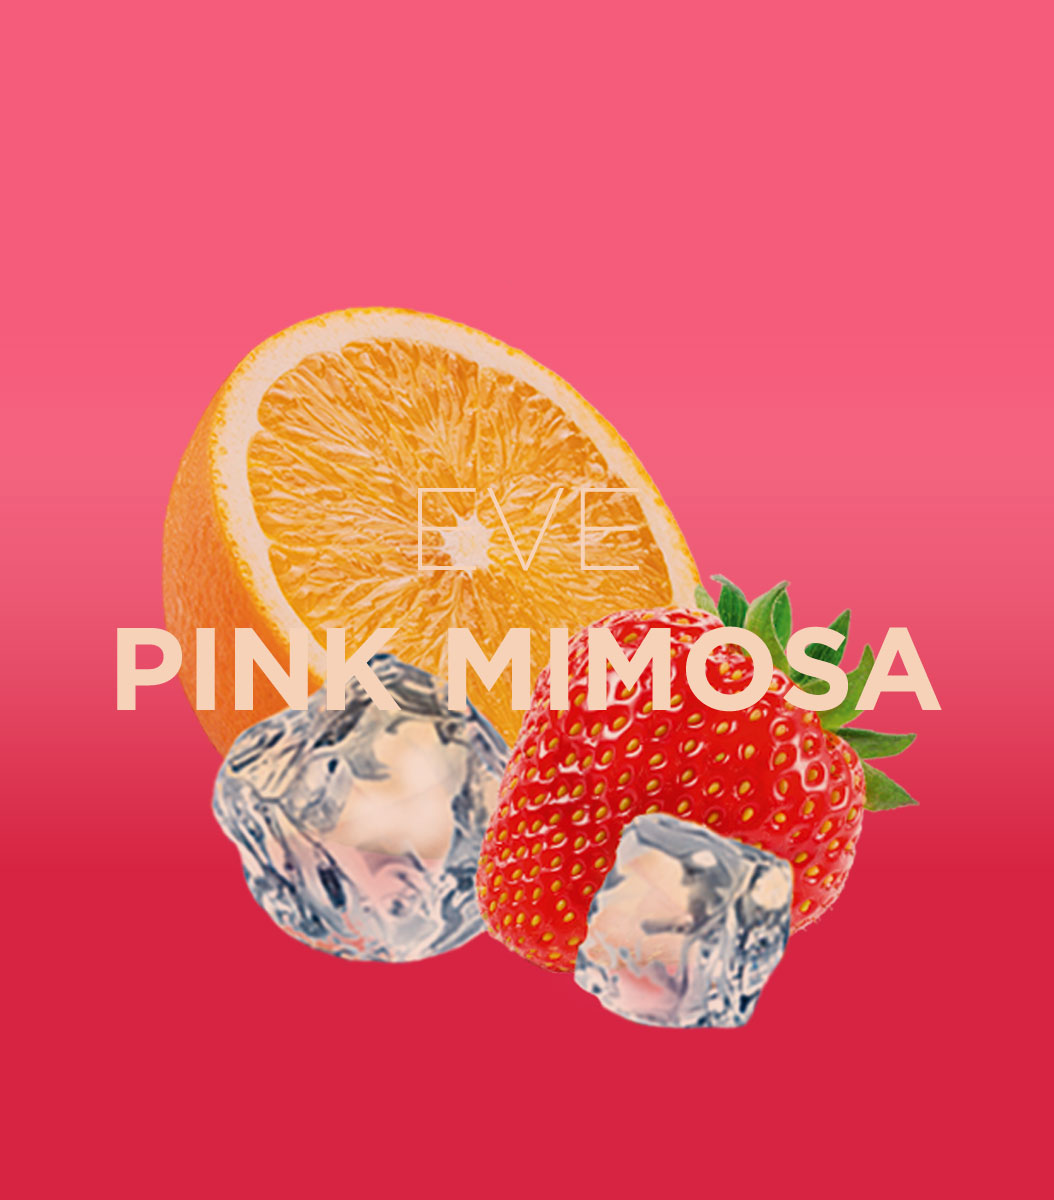 Pinkmimosa colored